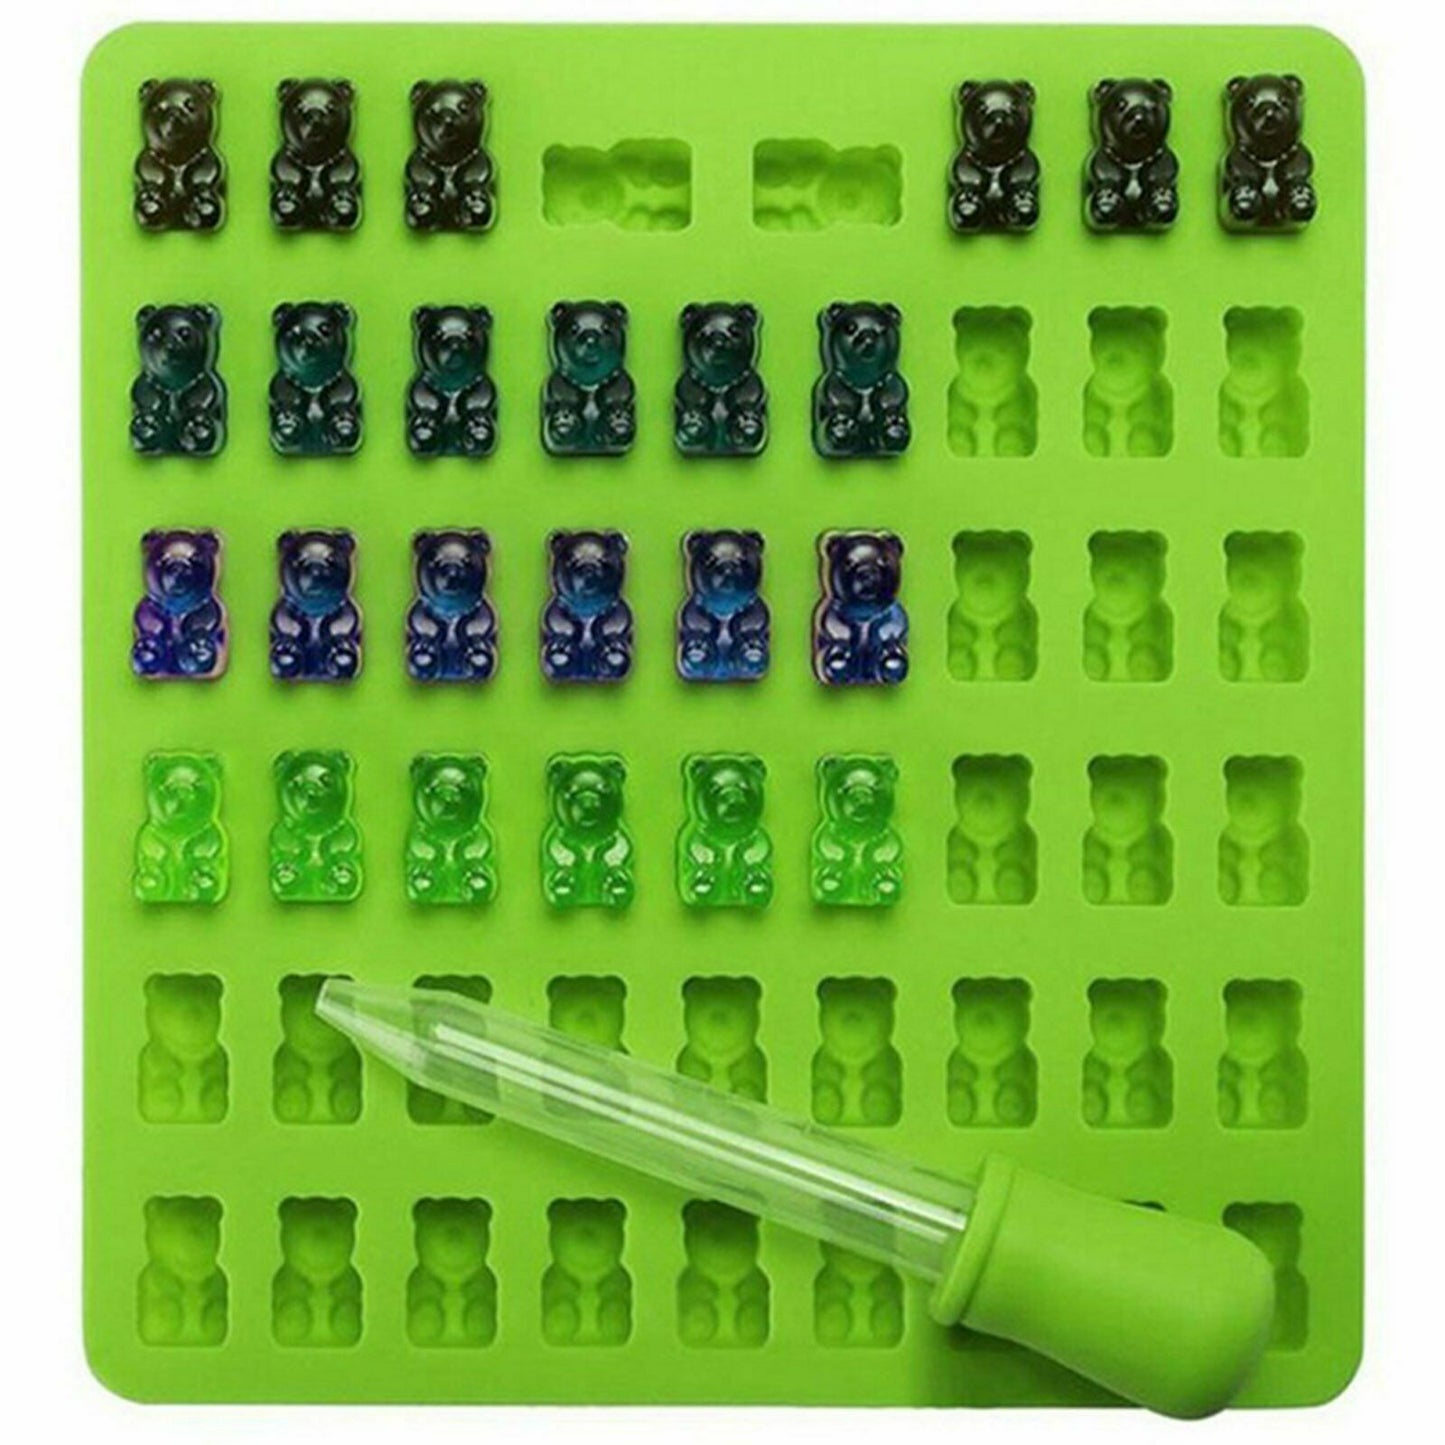 53 Cavity Silicone Gummy Bear Mold Candy Chocolate Jelly Ice Chocolate Moulds AU